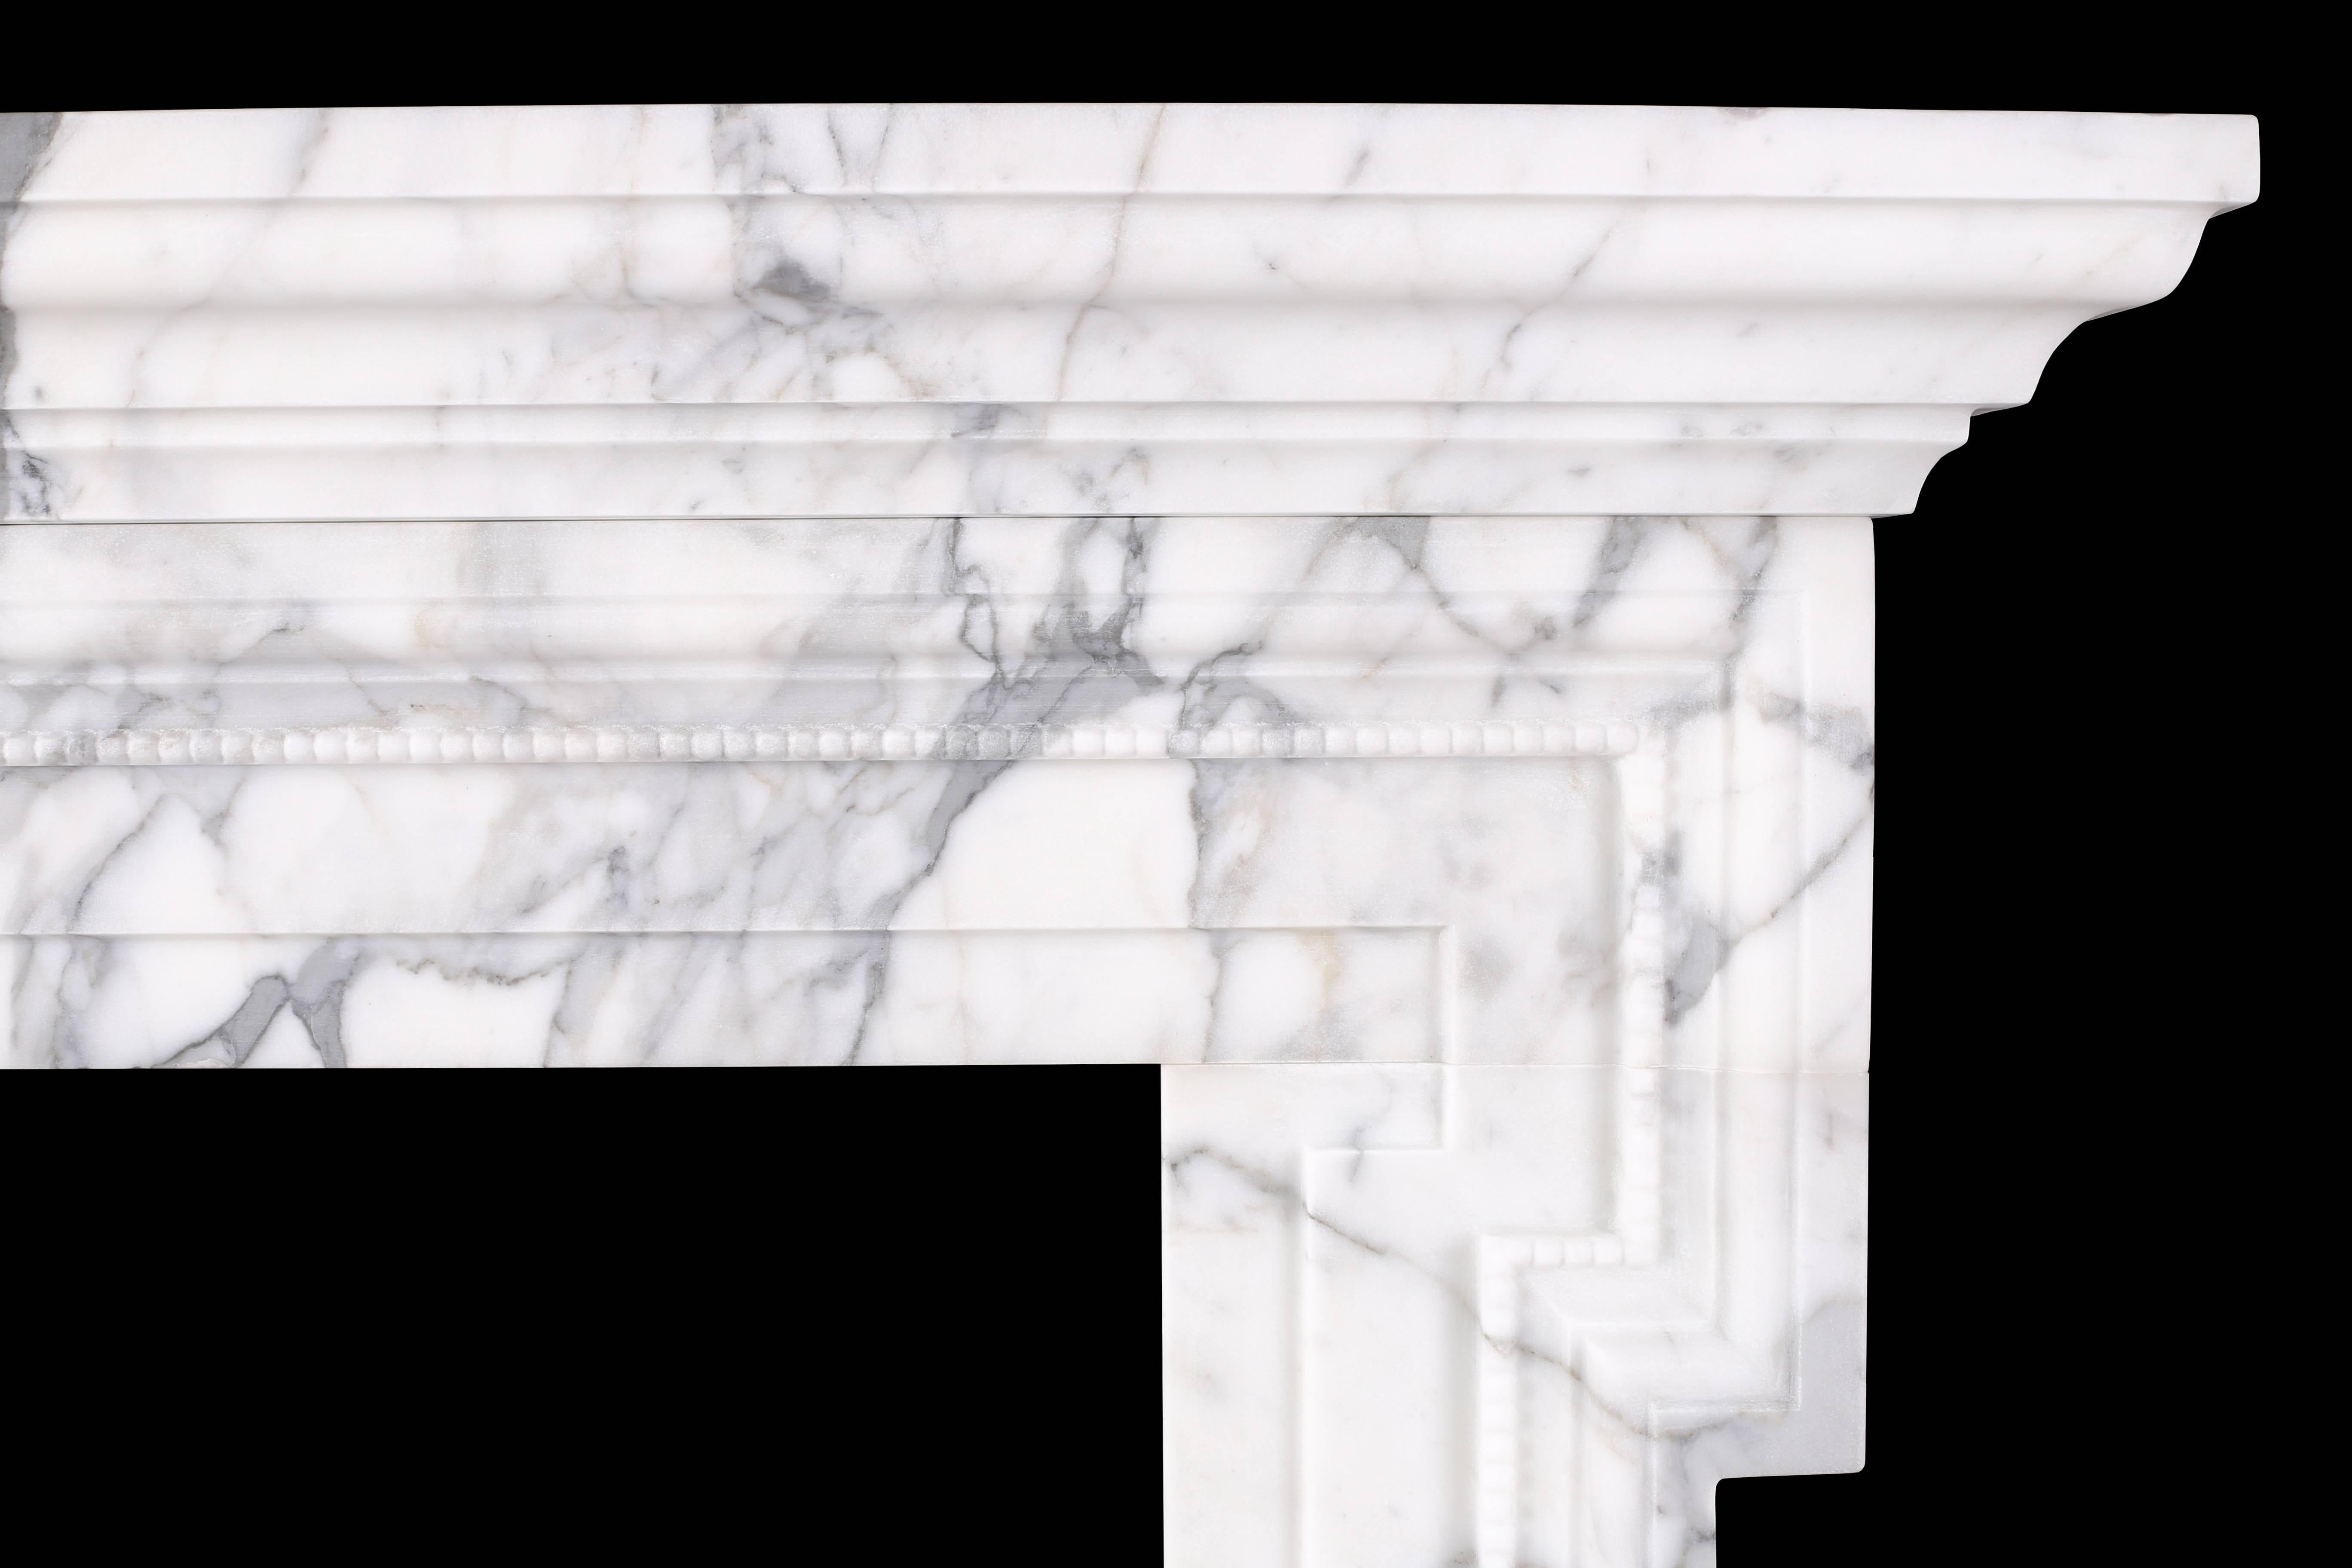 A mid-18th century chimneypiece Bolection with shelf in Italian white statuary marble

Depth: 8 in (200mm)
External Height: 48 in (1220mm)
External Width: 64 in (1625mm)
Internal Height: 36 in (915mm)
Internal Width: 37 in (940mm)

Stock No: